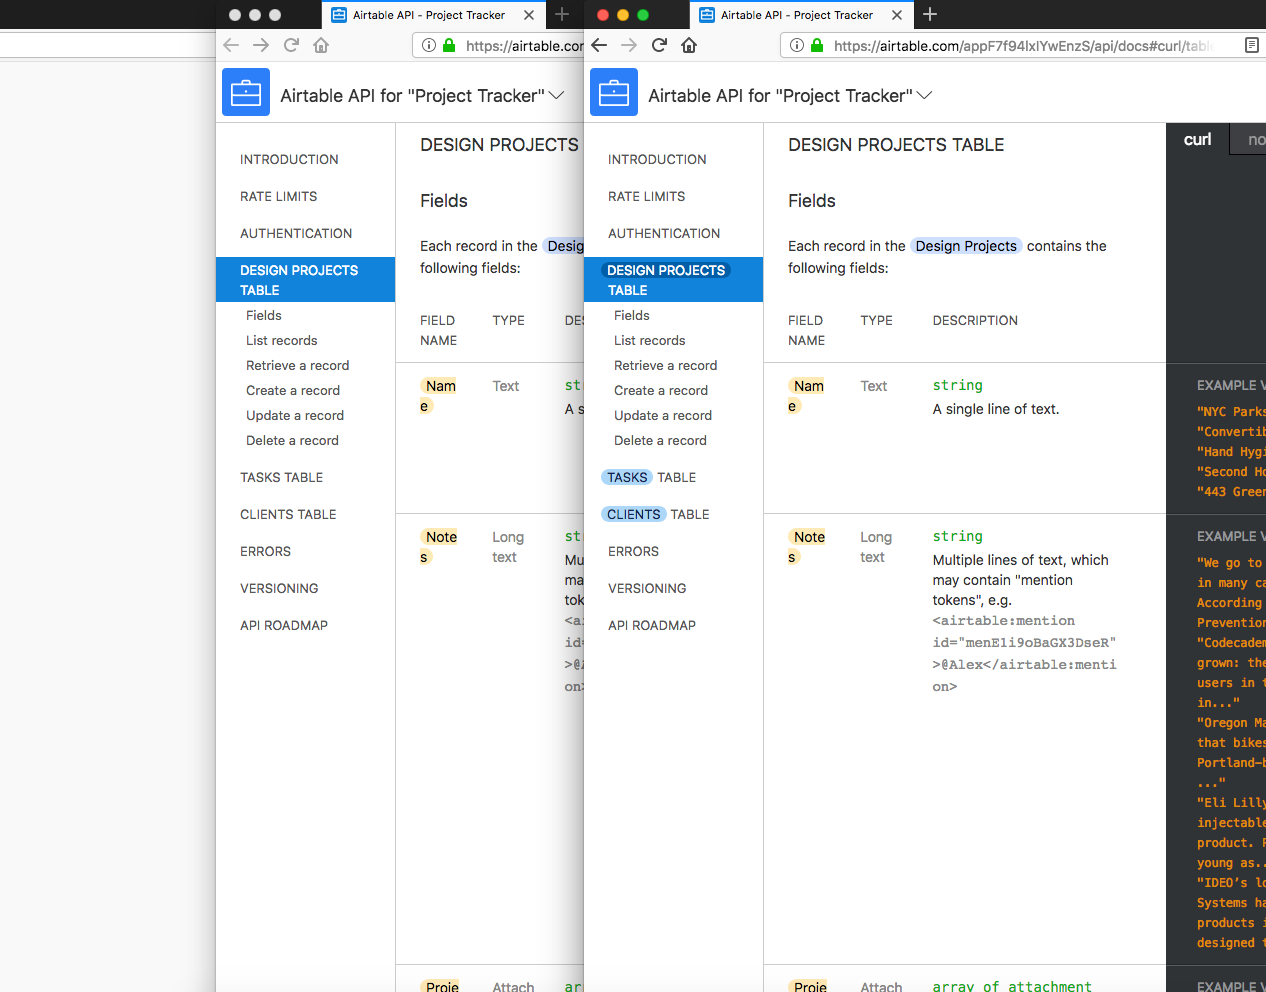 API documentation page side by side: One is the current version, and one modified with pills.